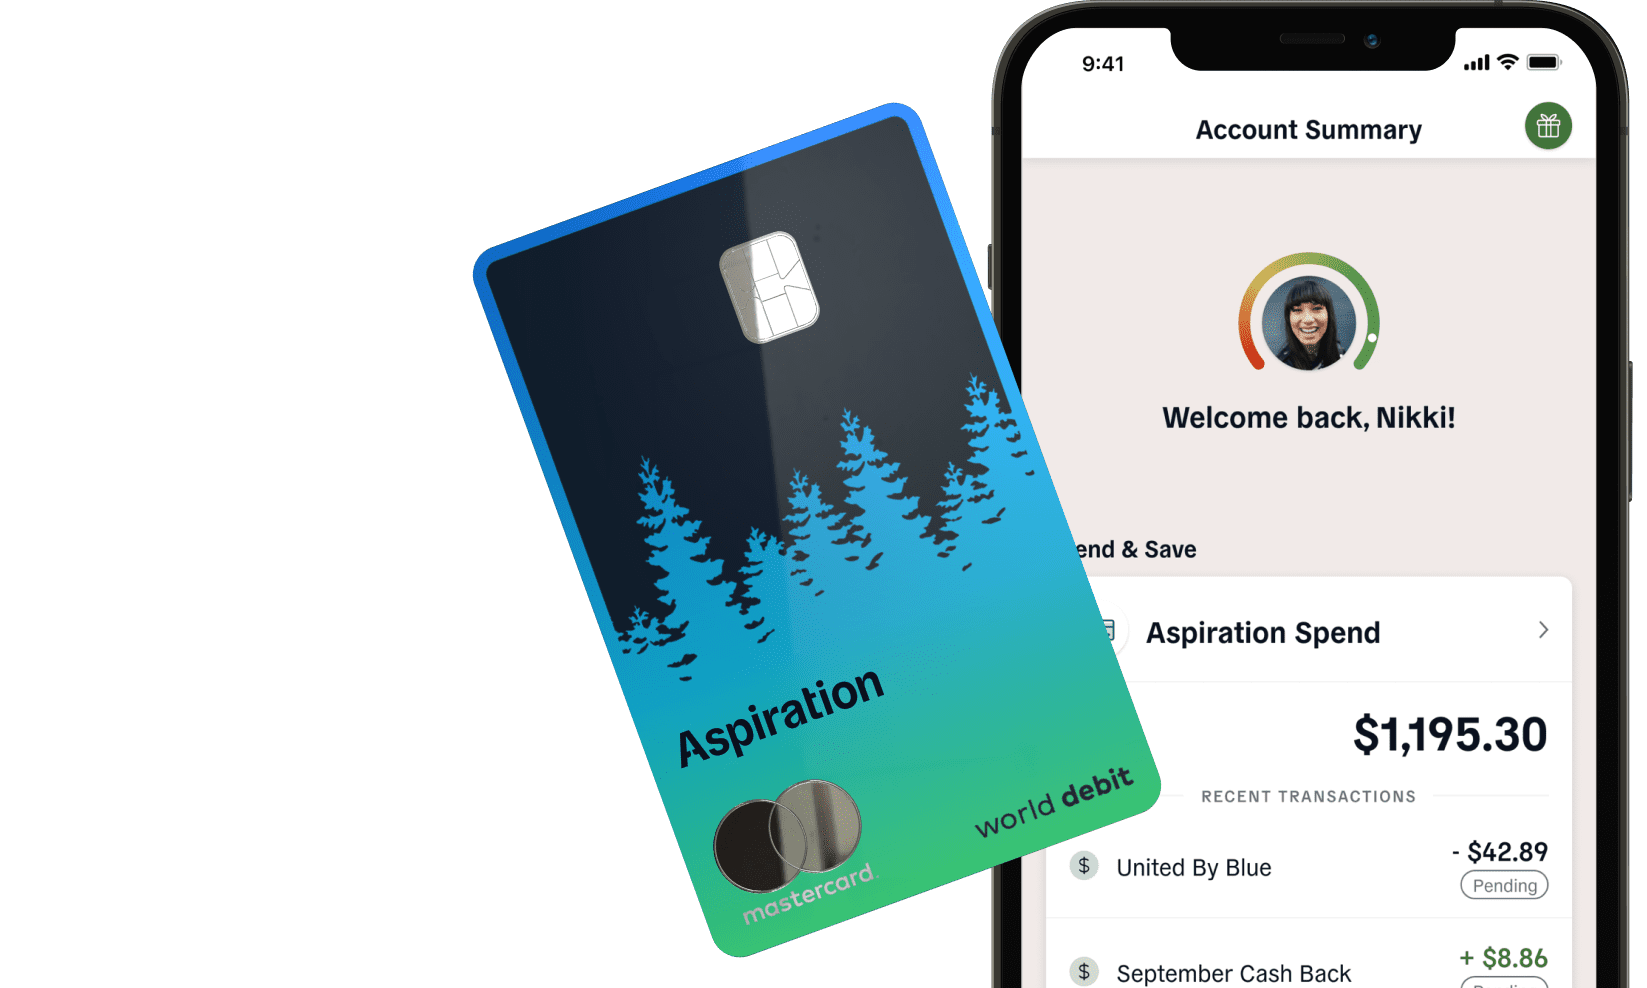 Find out how the application process to get this debit card works! Source: Aspiration.